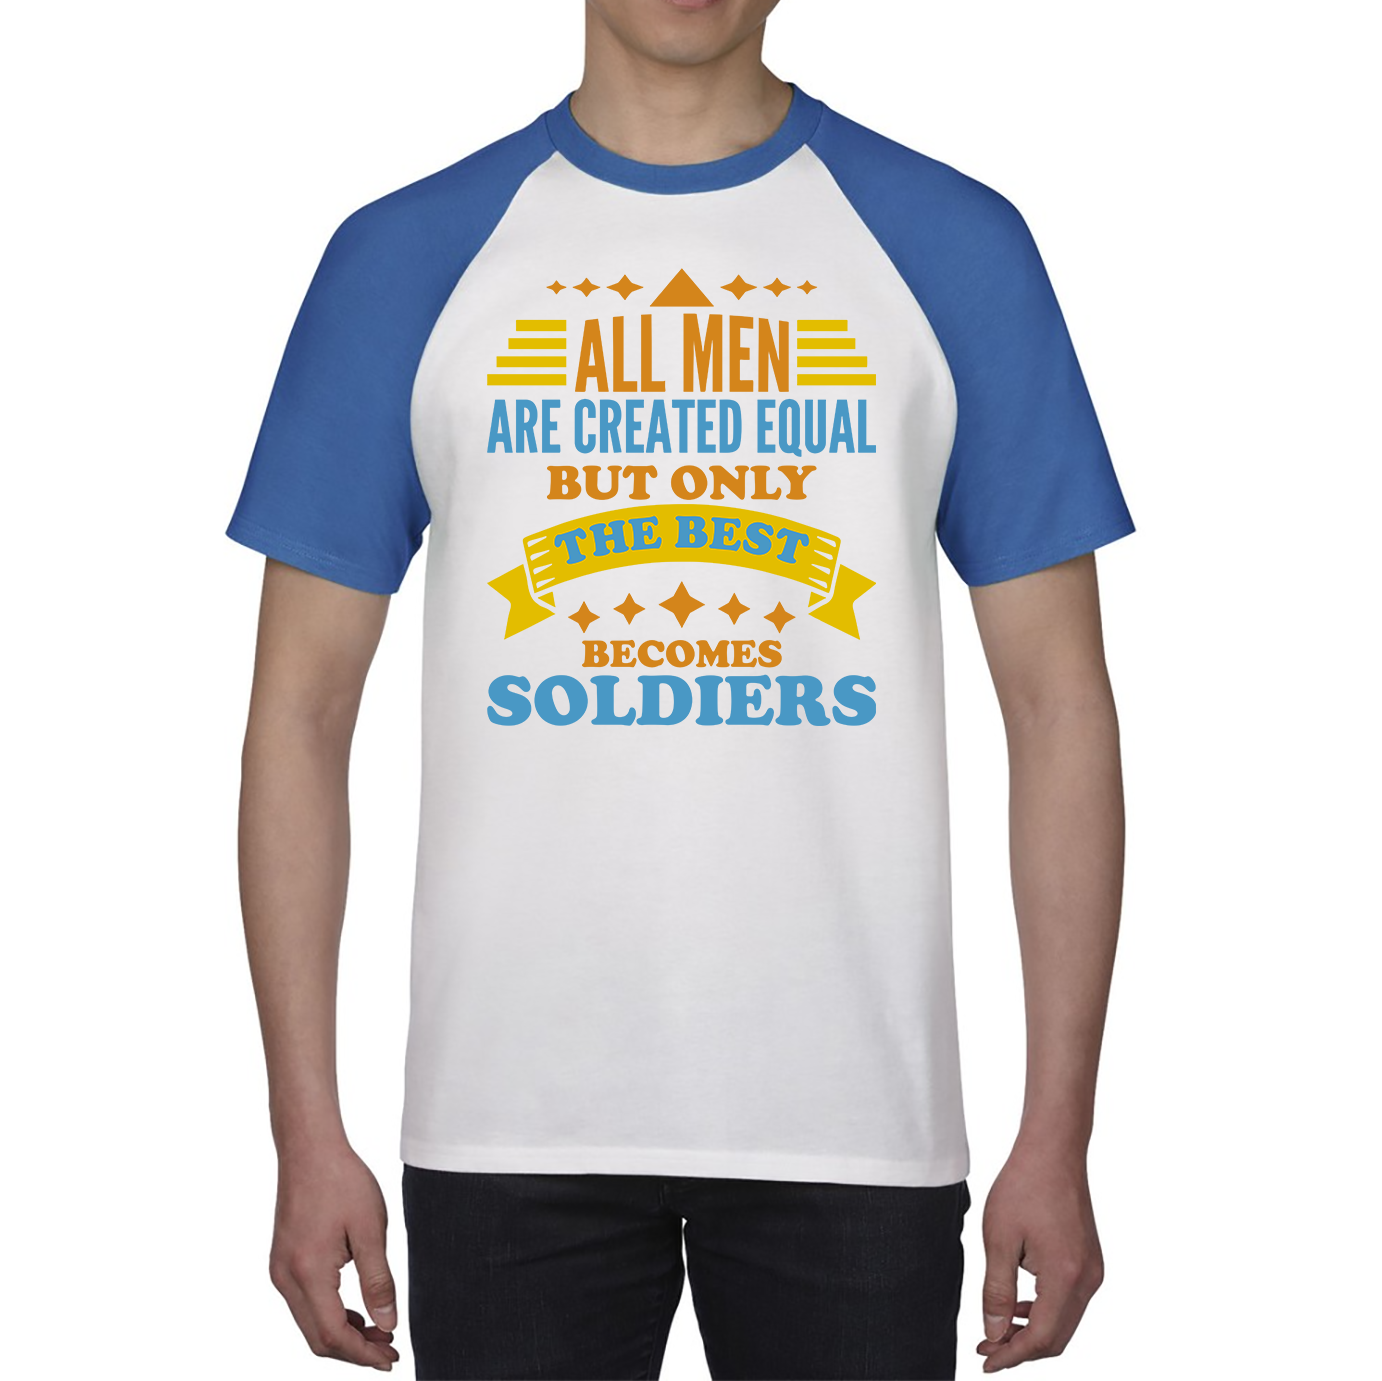 All Men Are Created Equal But Only The Best Becomes Soldiers Baseball T Shirt